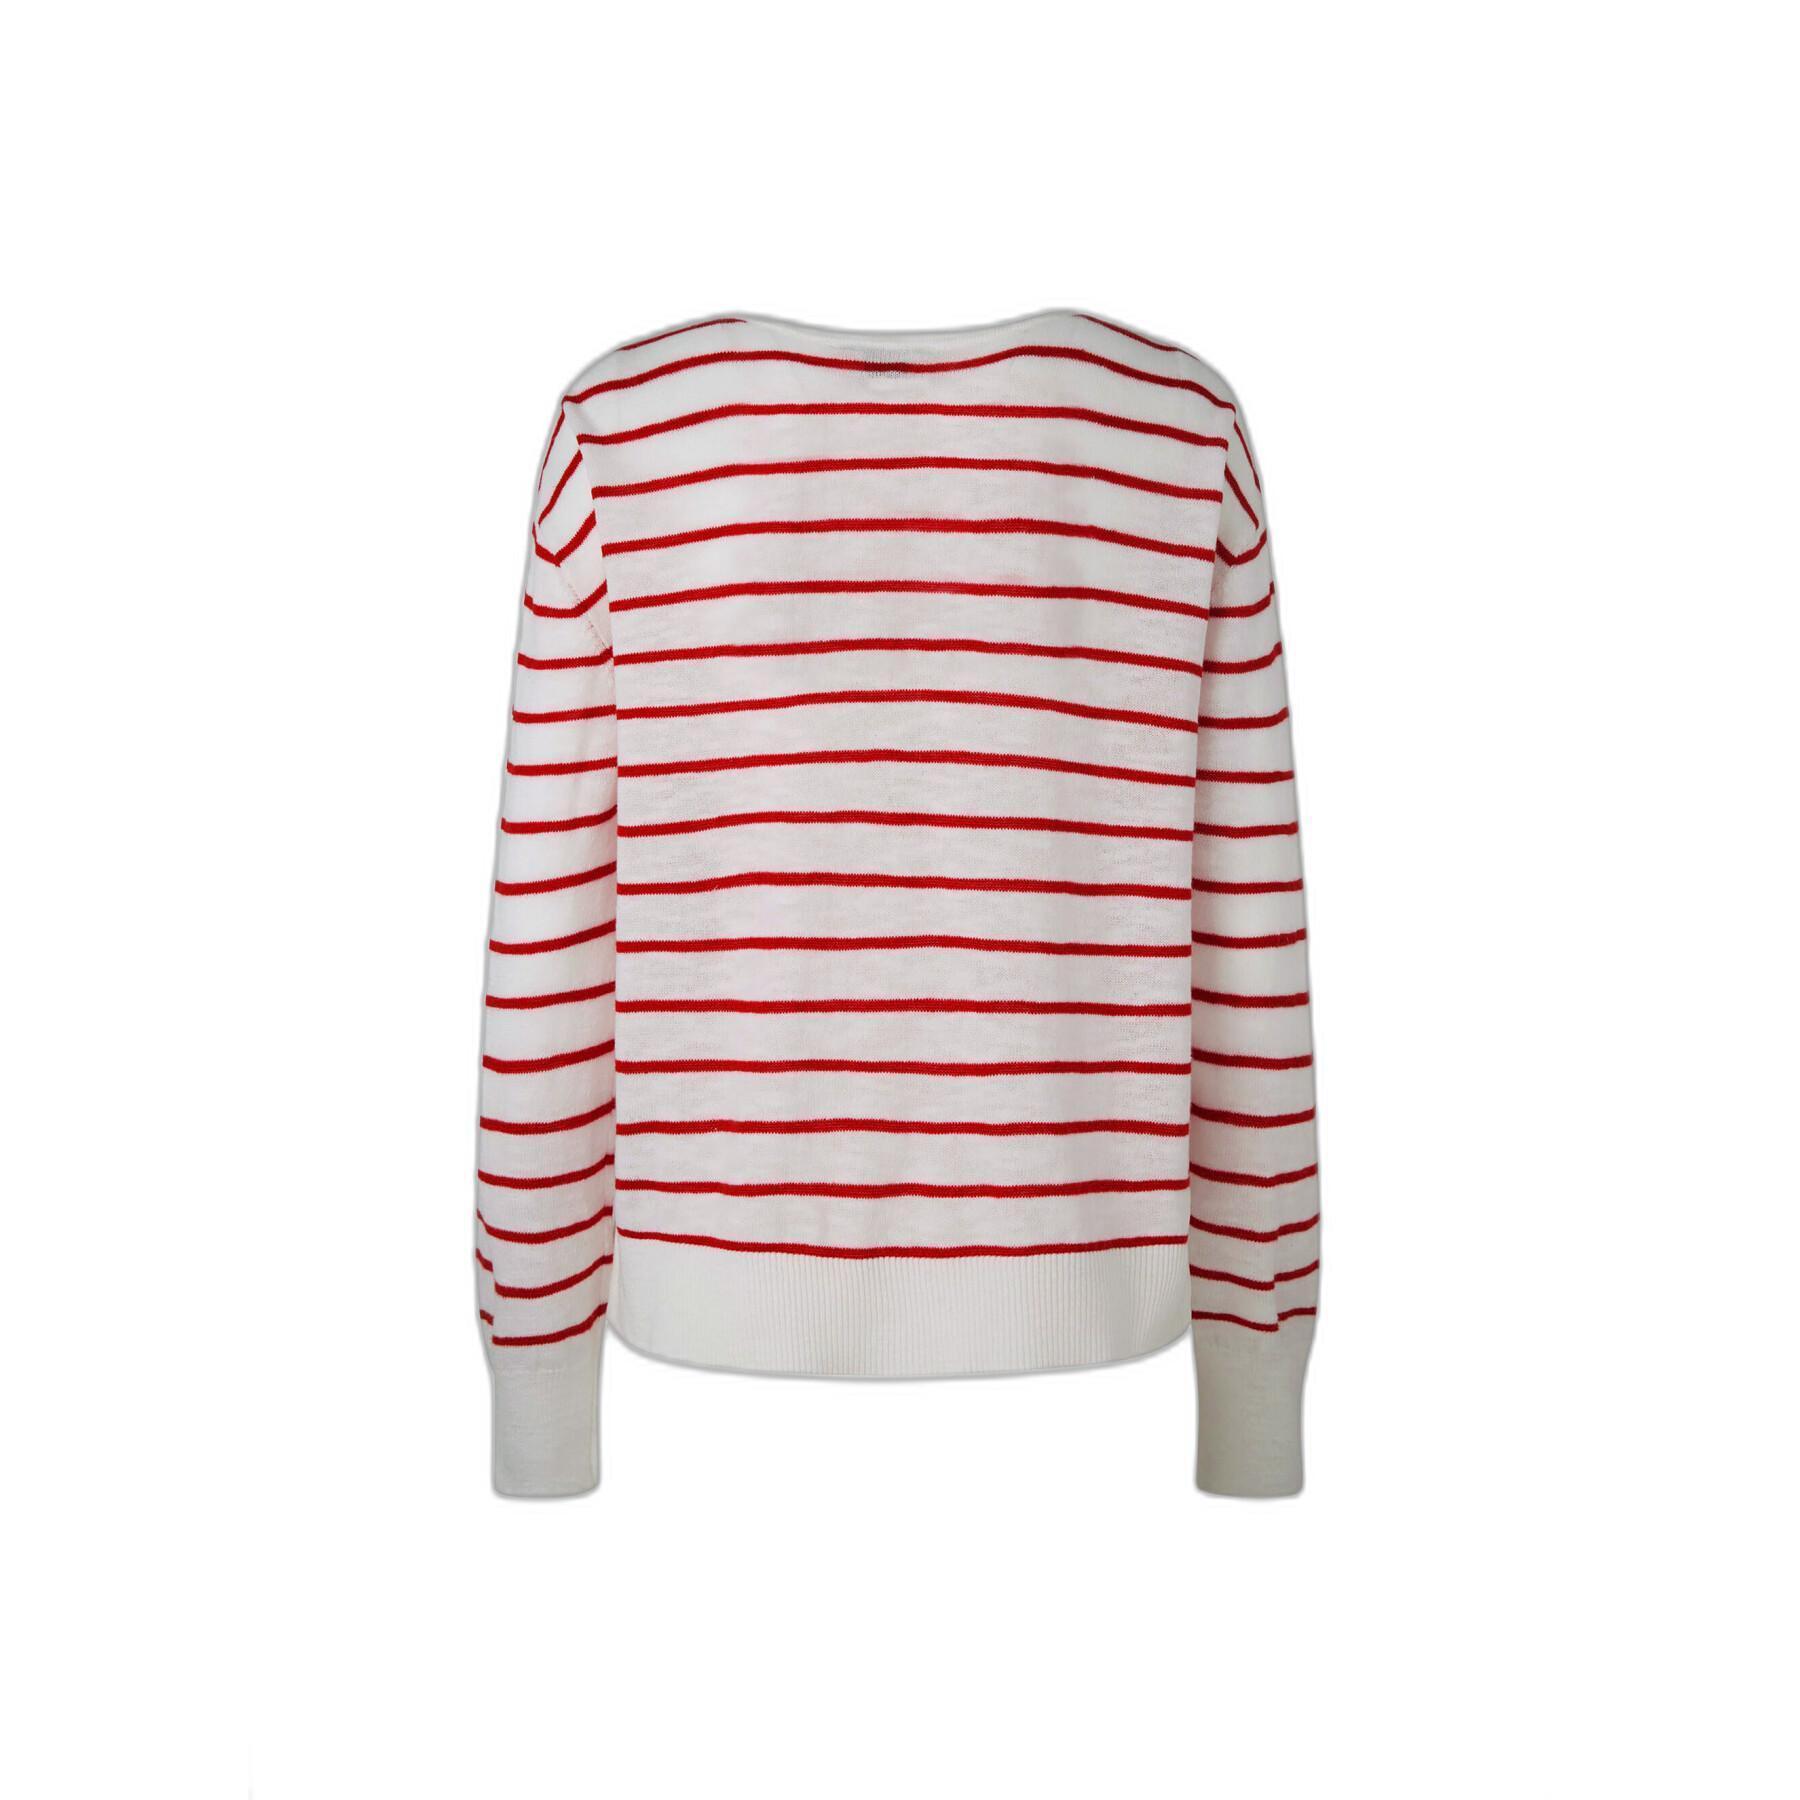 Women's sweater Pepe Jeans Polly